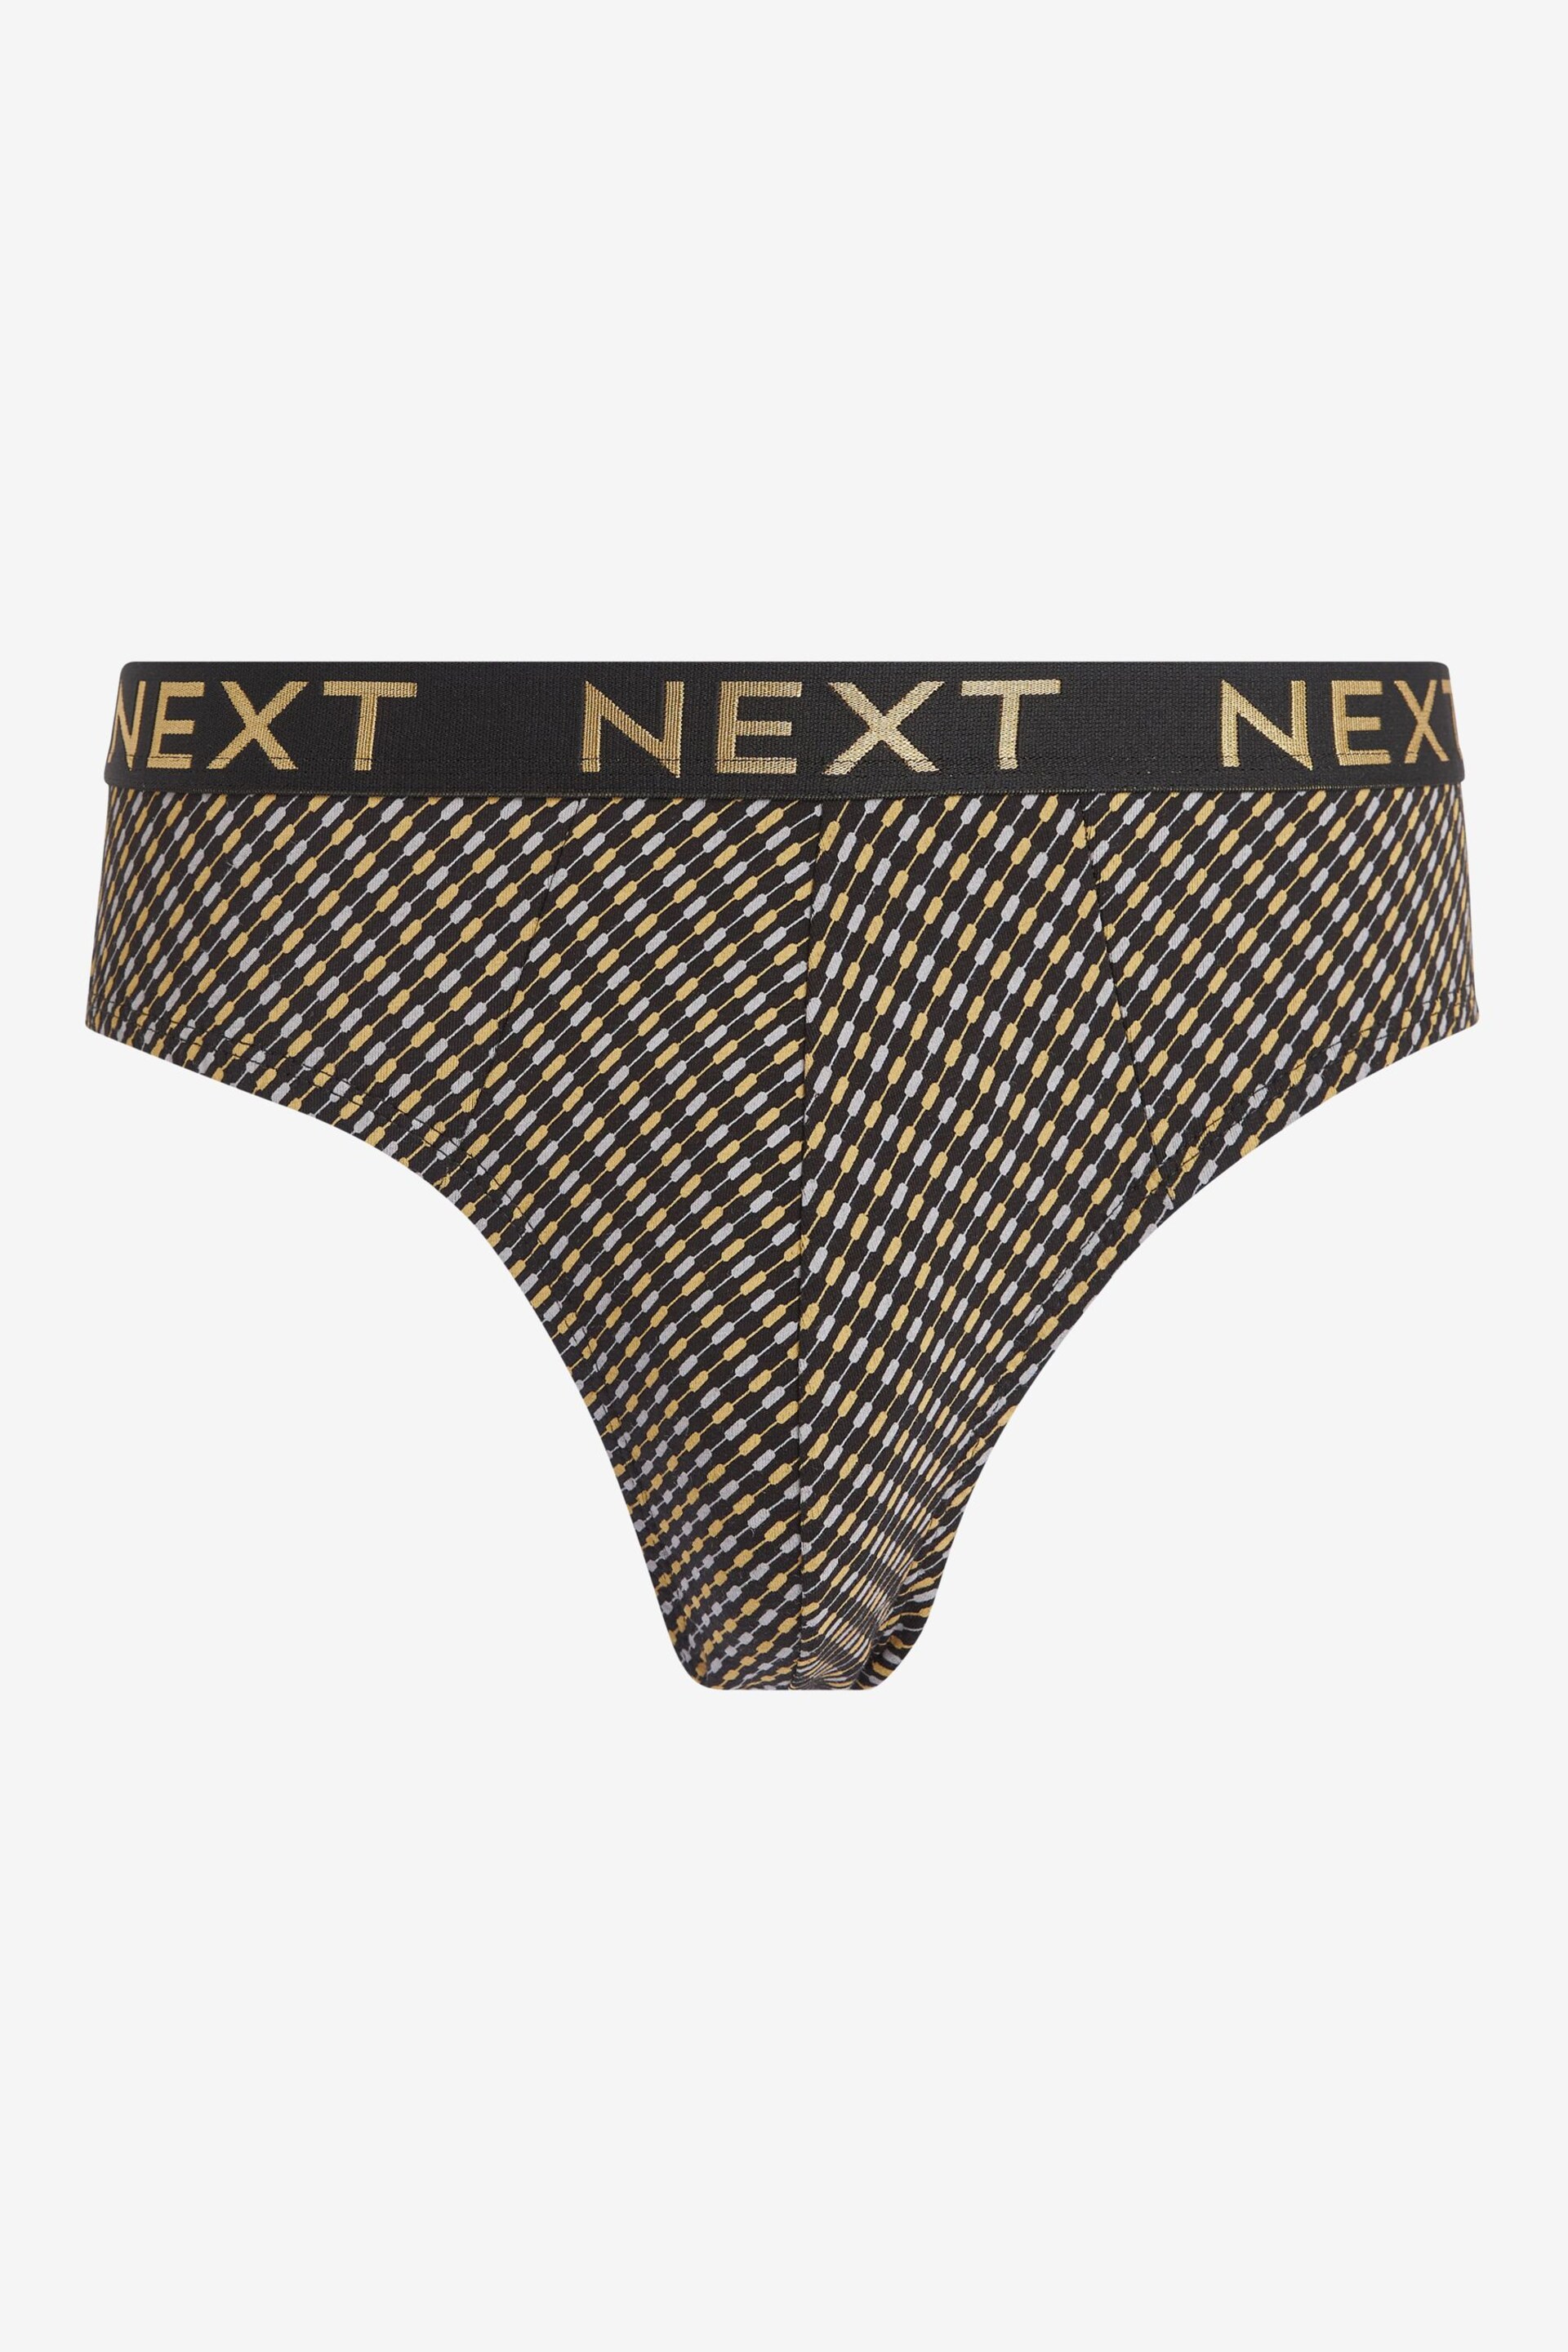 Black Gold Pattern 4 pack Cotton Rich Briefs - Image 6 of 10